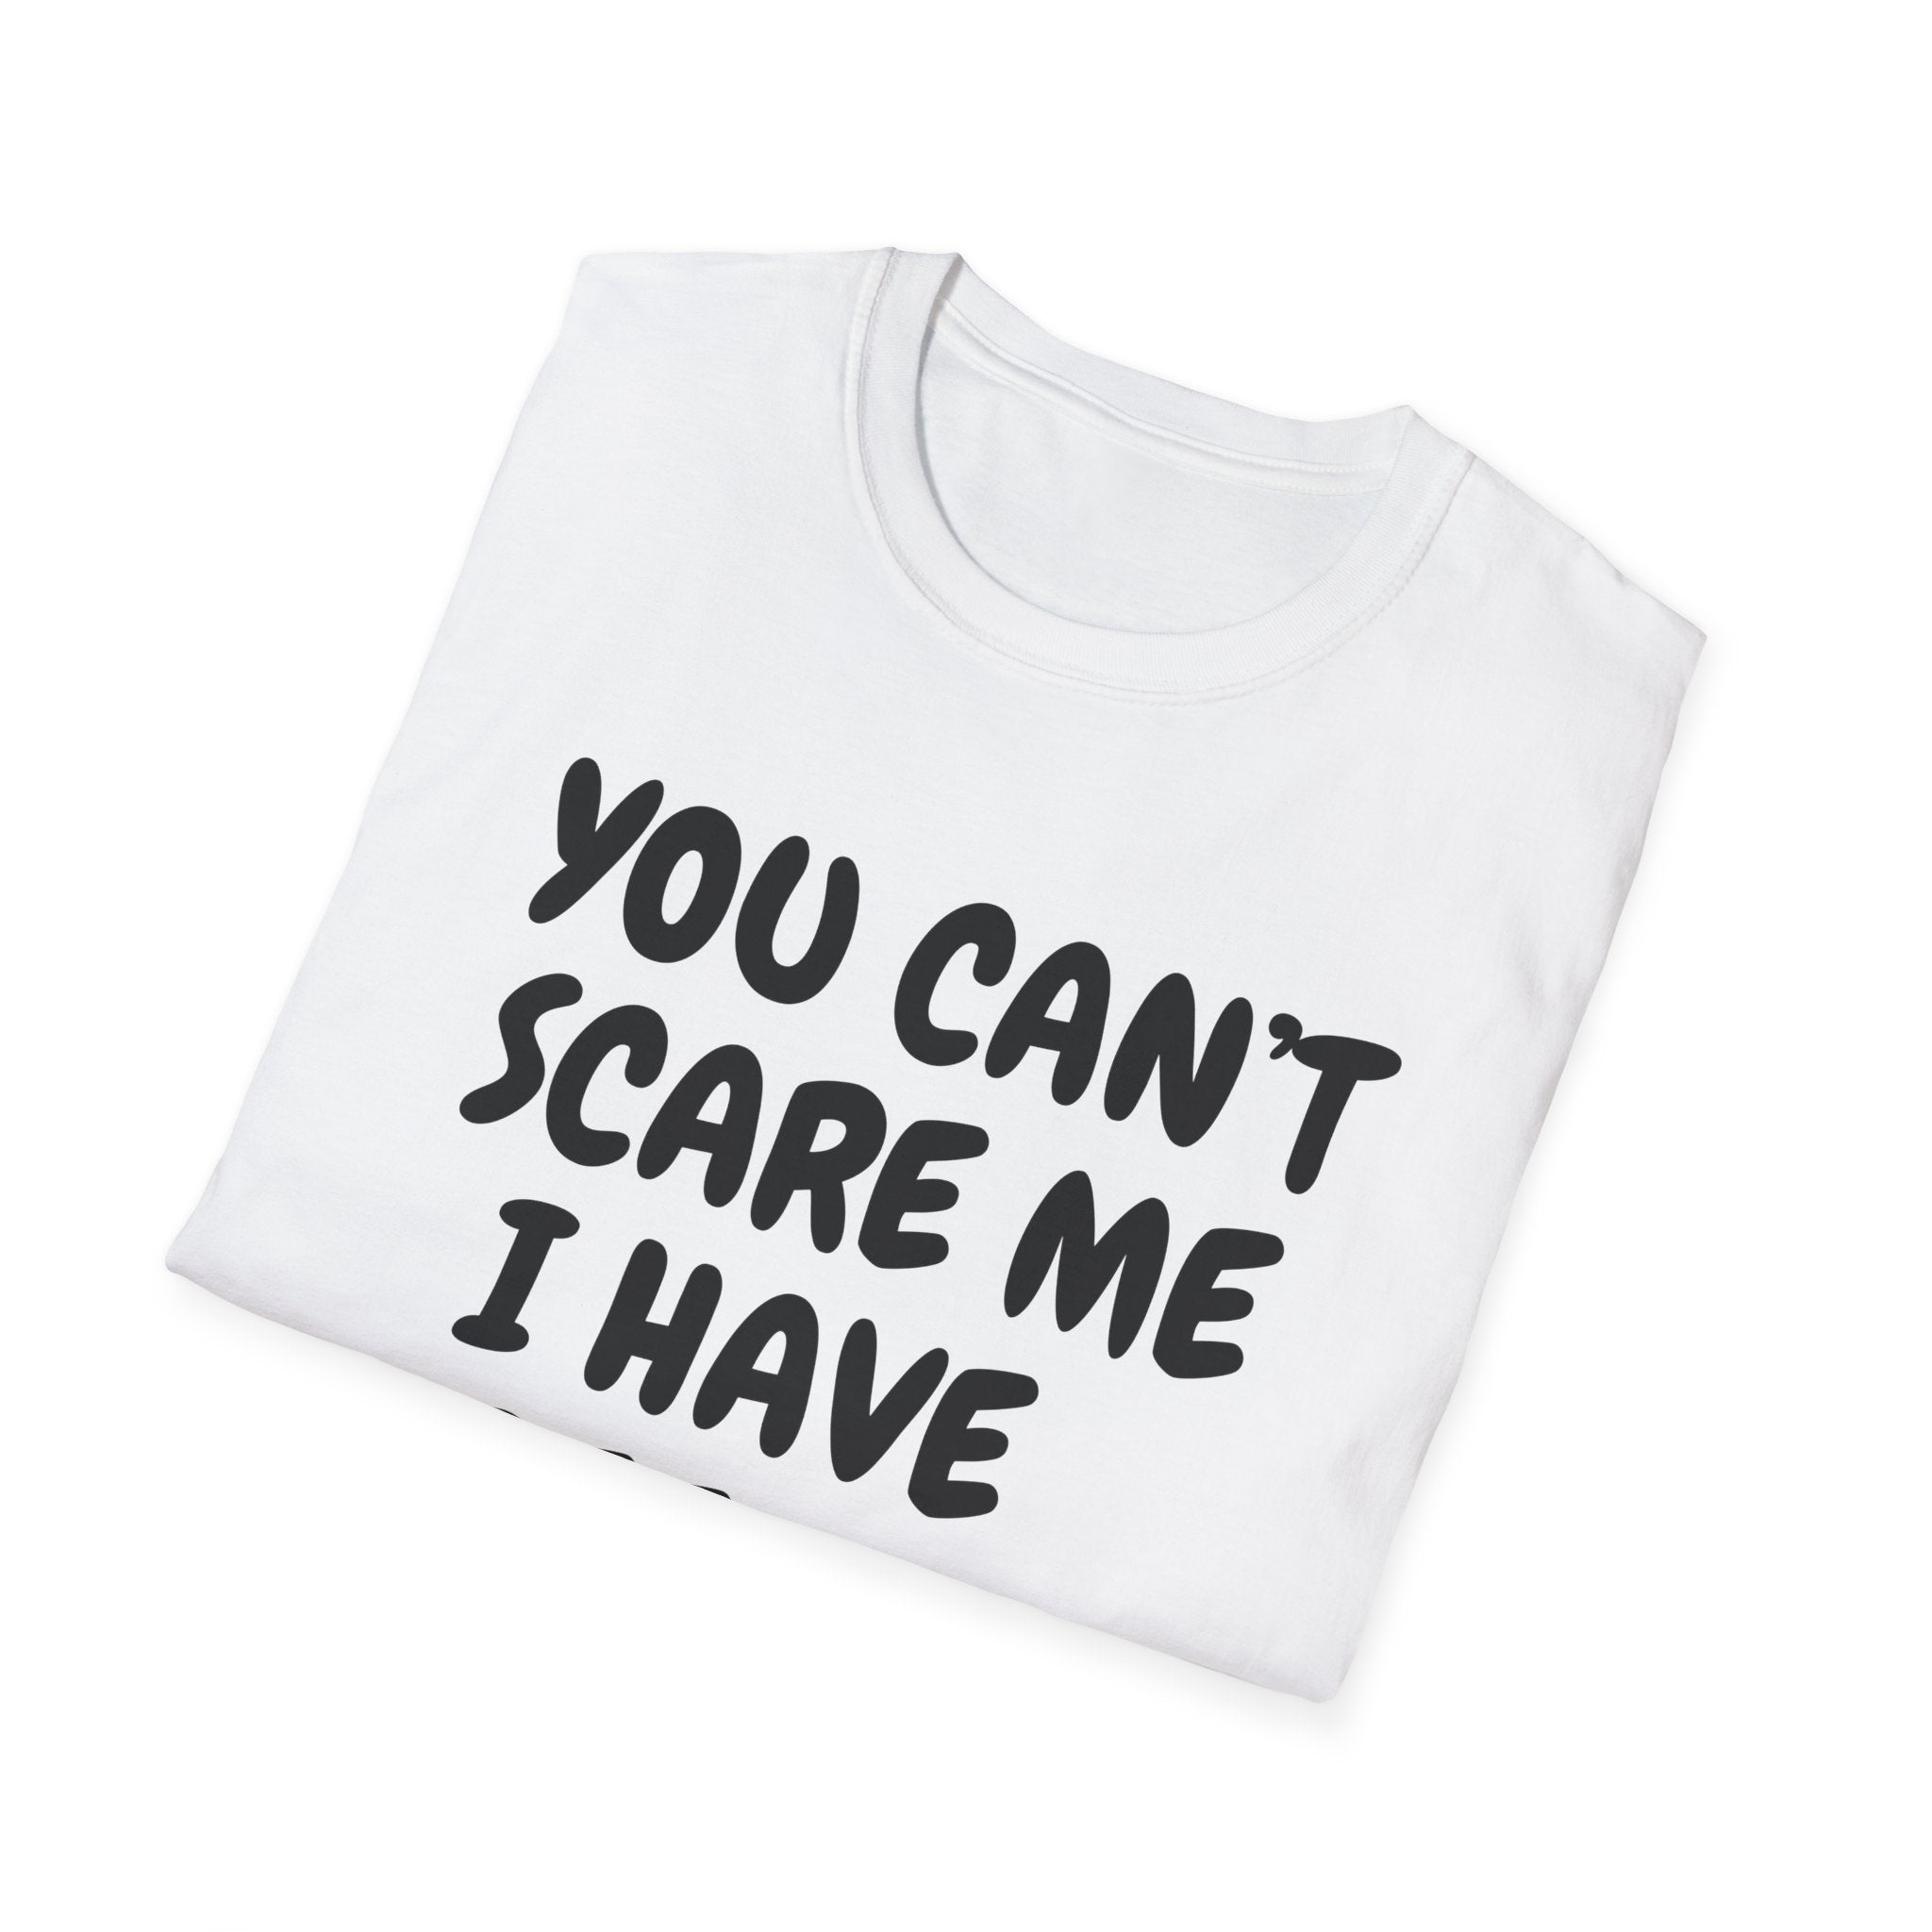 Father's Day Gift You Can't Scare Me I have Three Girls Funny Dad T-shirt, Father's Day Gift, Gift for Dad, Dad Shirt, Men's T-shirt